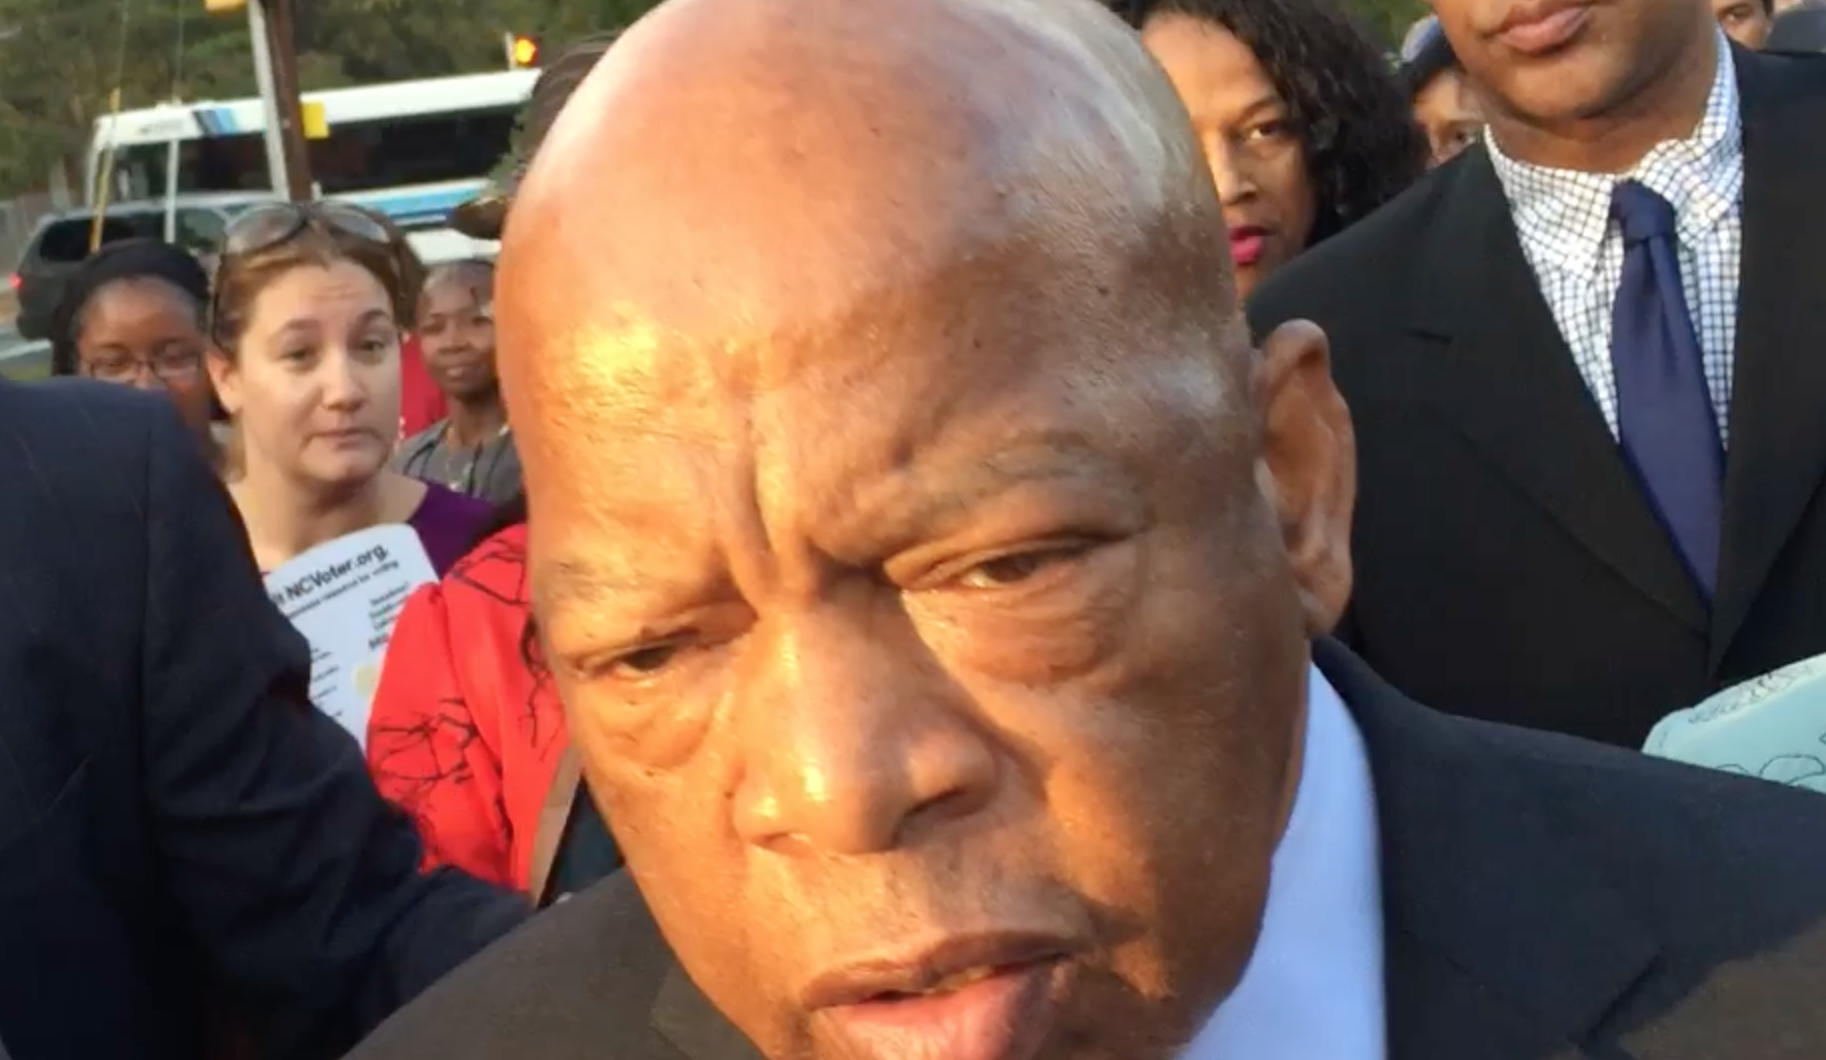 Mr Lewis following a campaign event in Charlotte